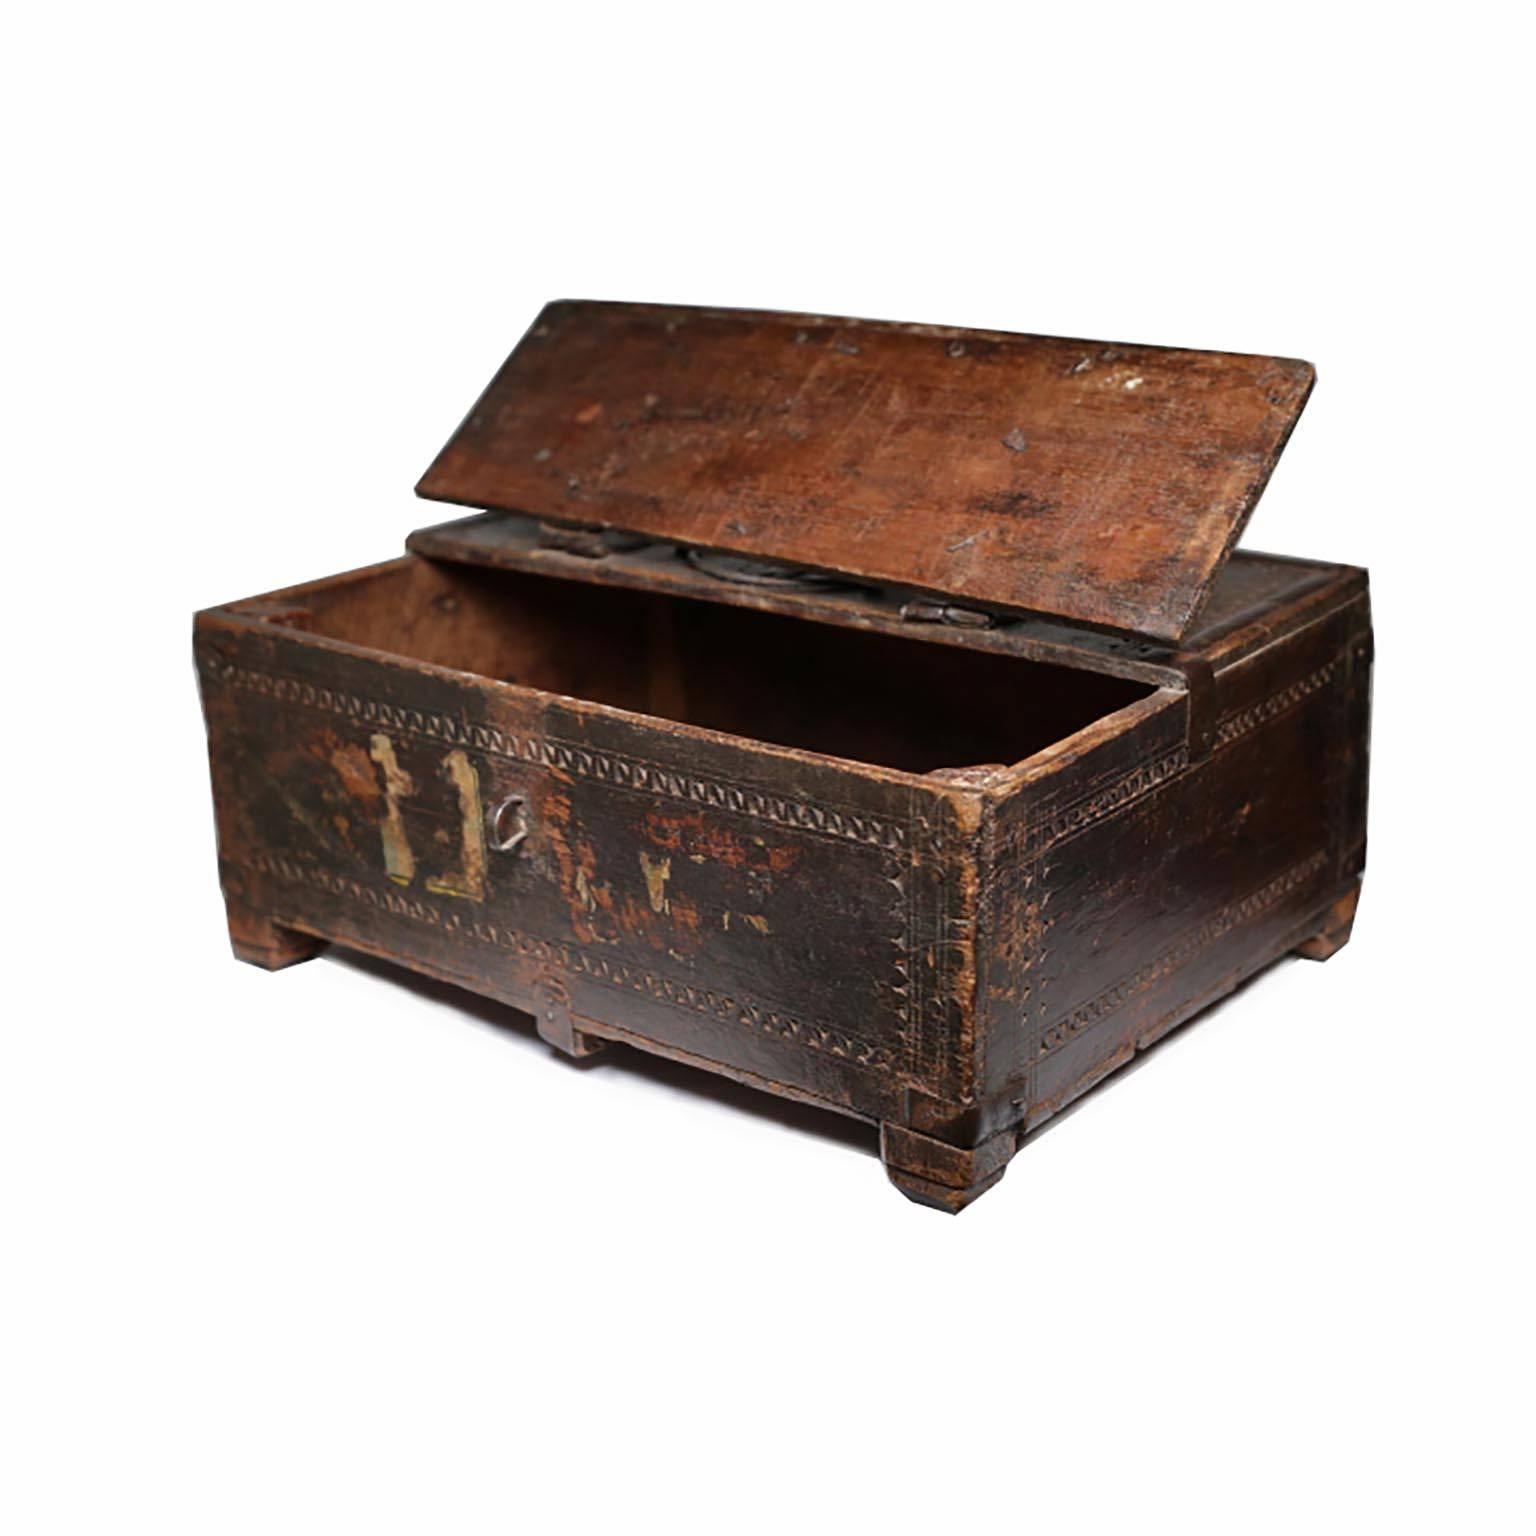 Latched and hinged wooden document box with metal accents that light opens from the top. Rajasthan, India, circa 1800s.